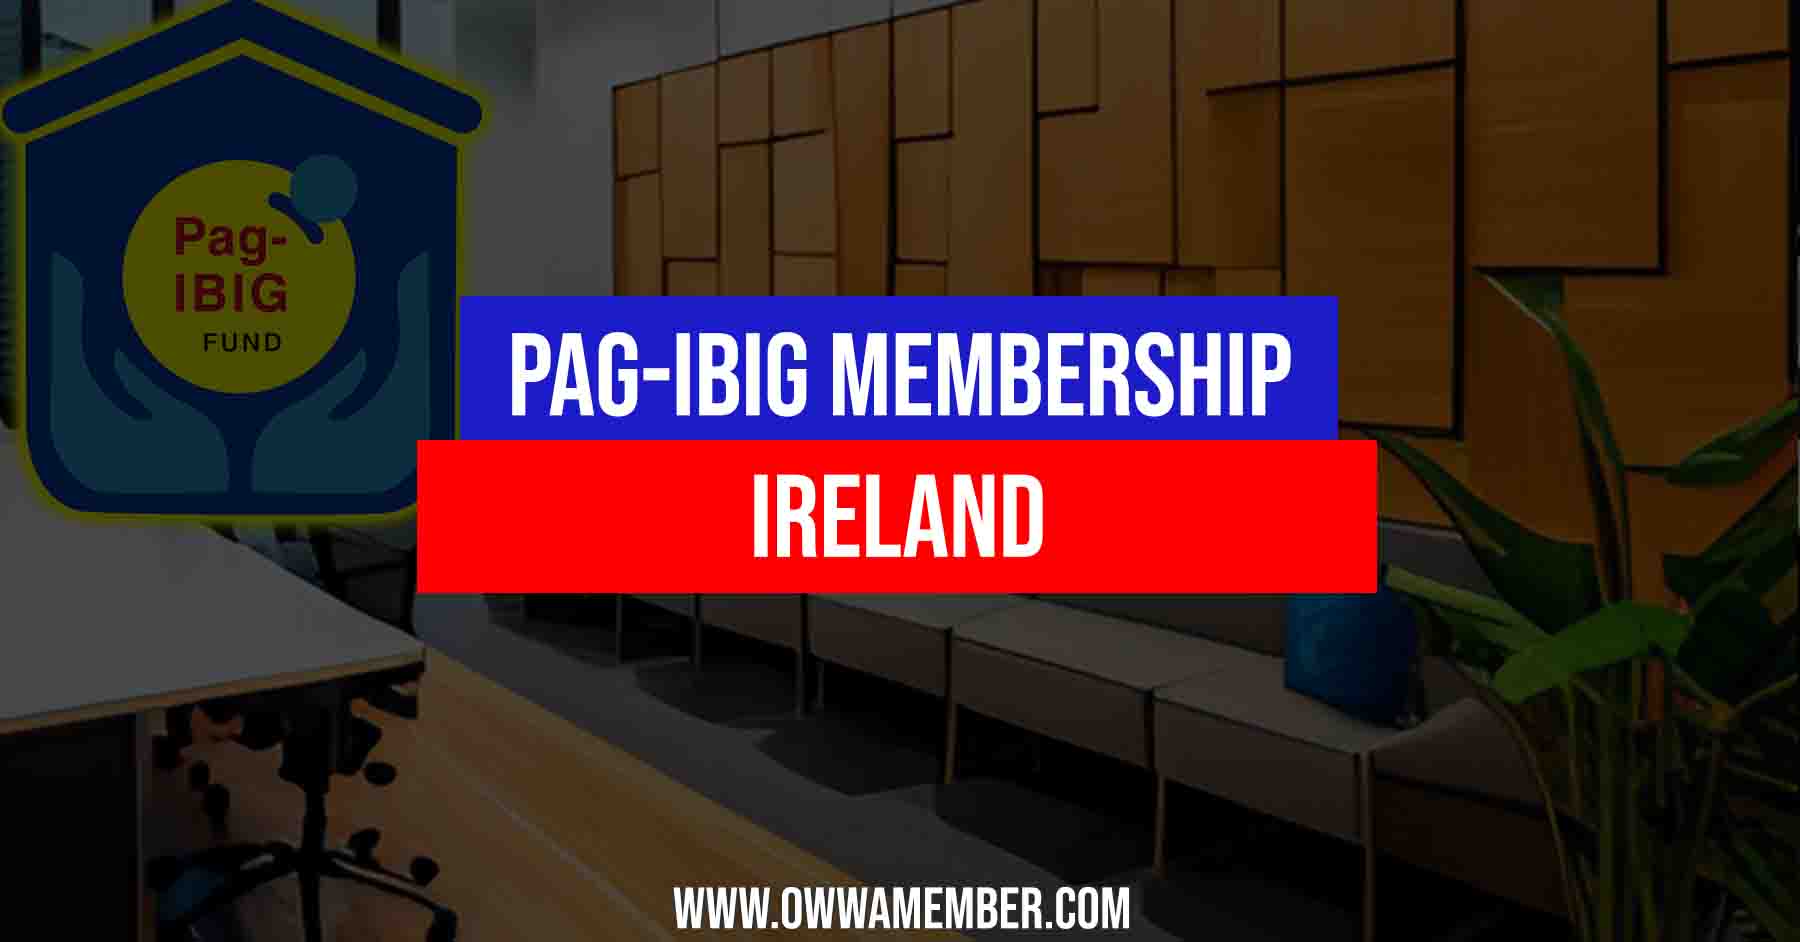 apply pag-ibig membership in ireland for ofw